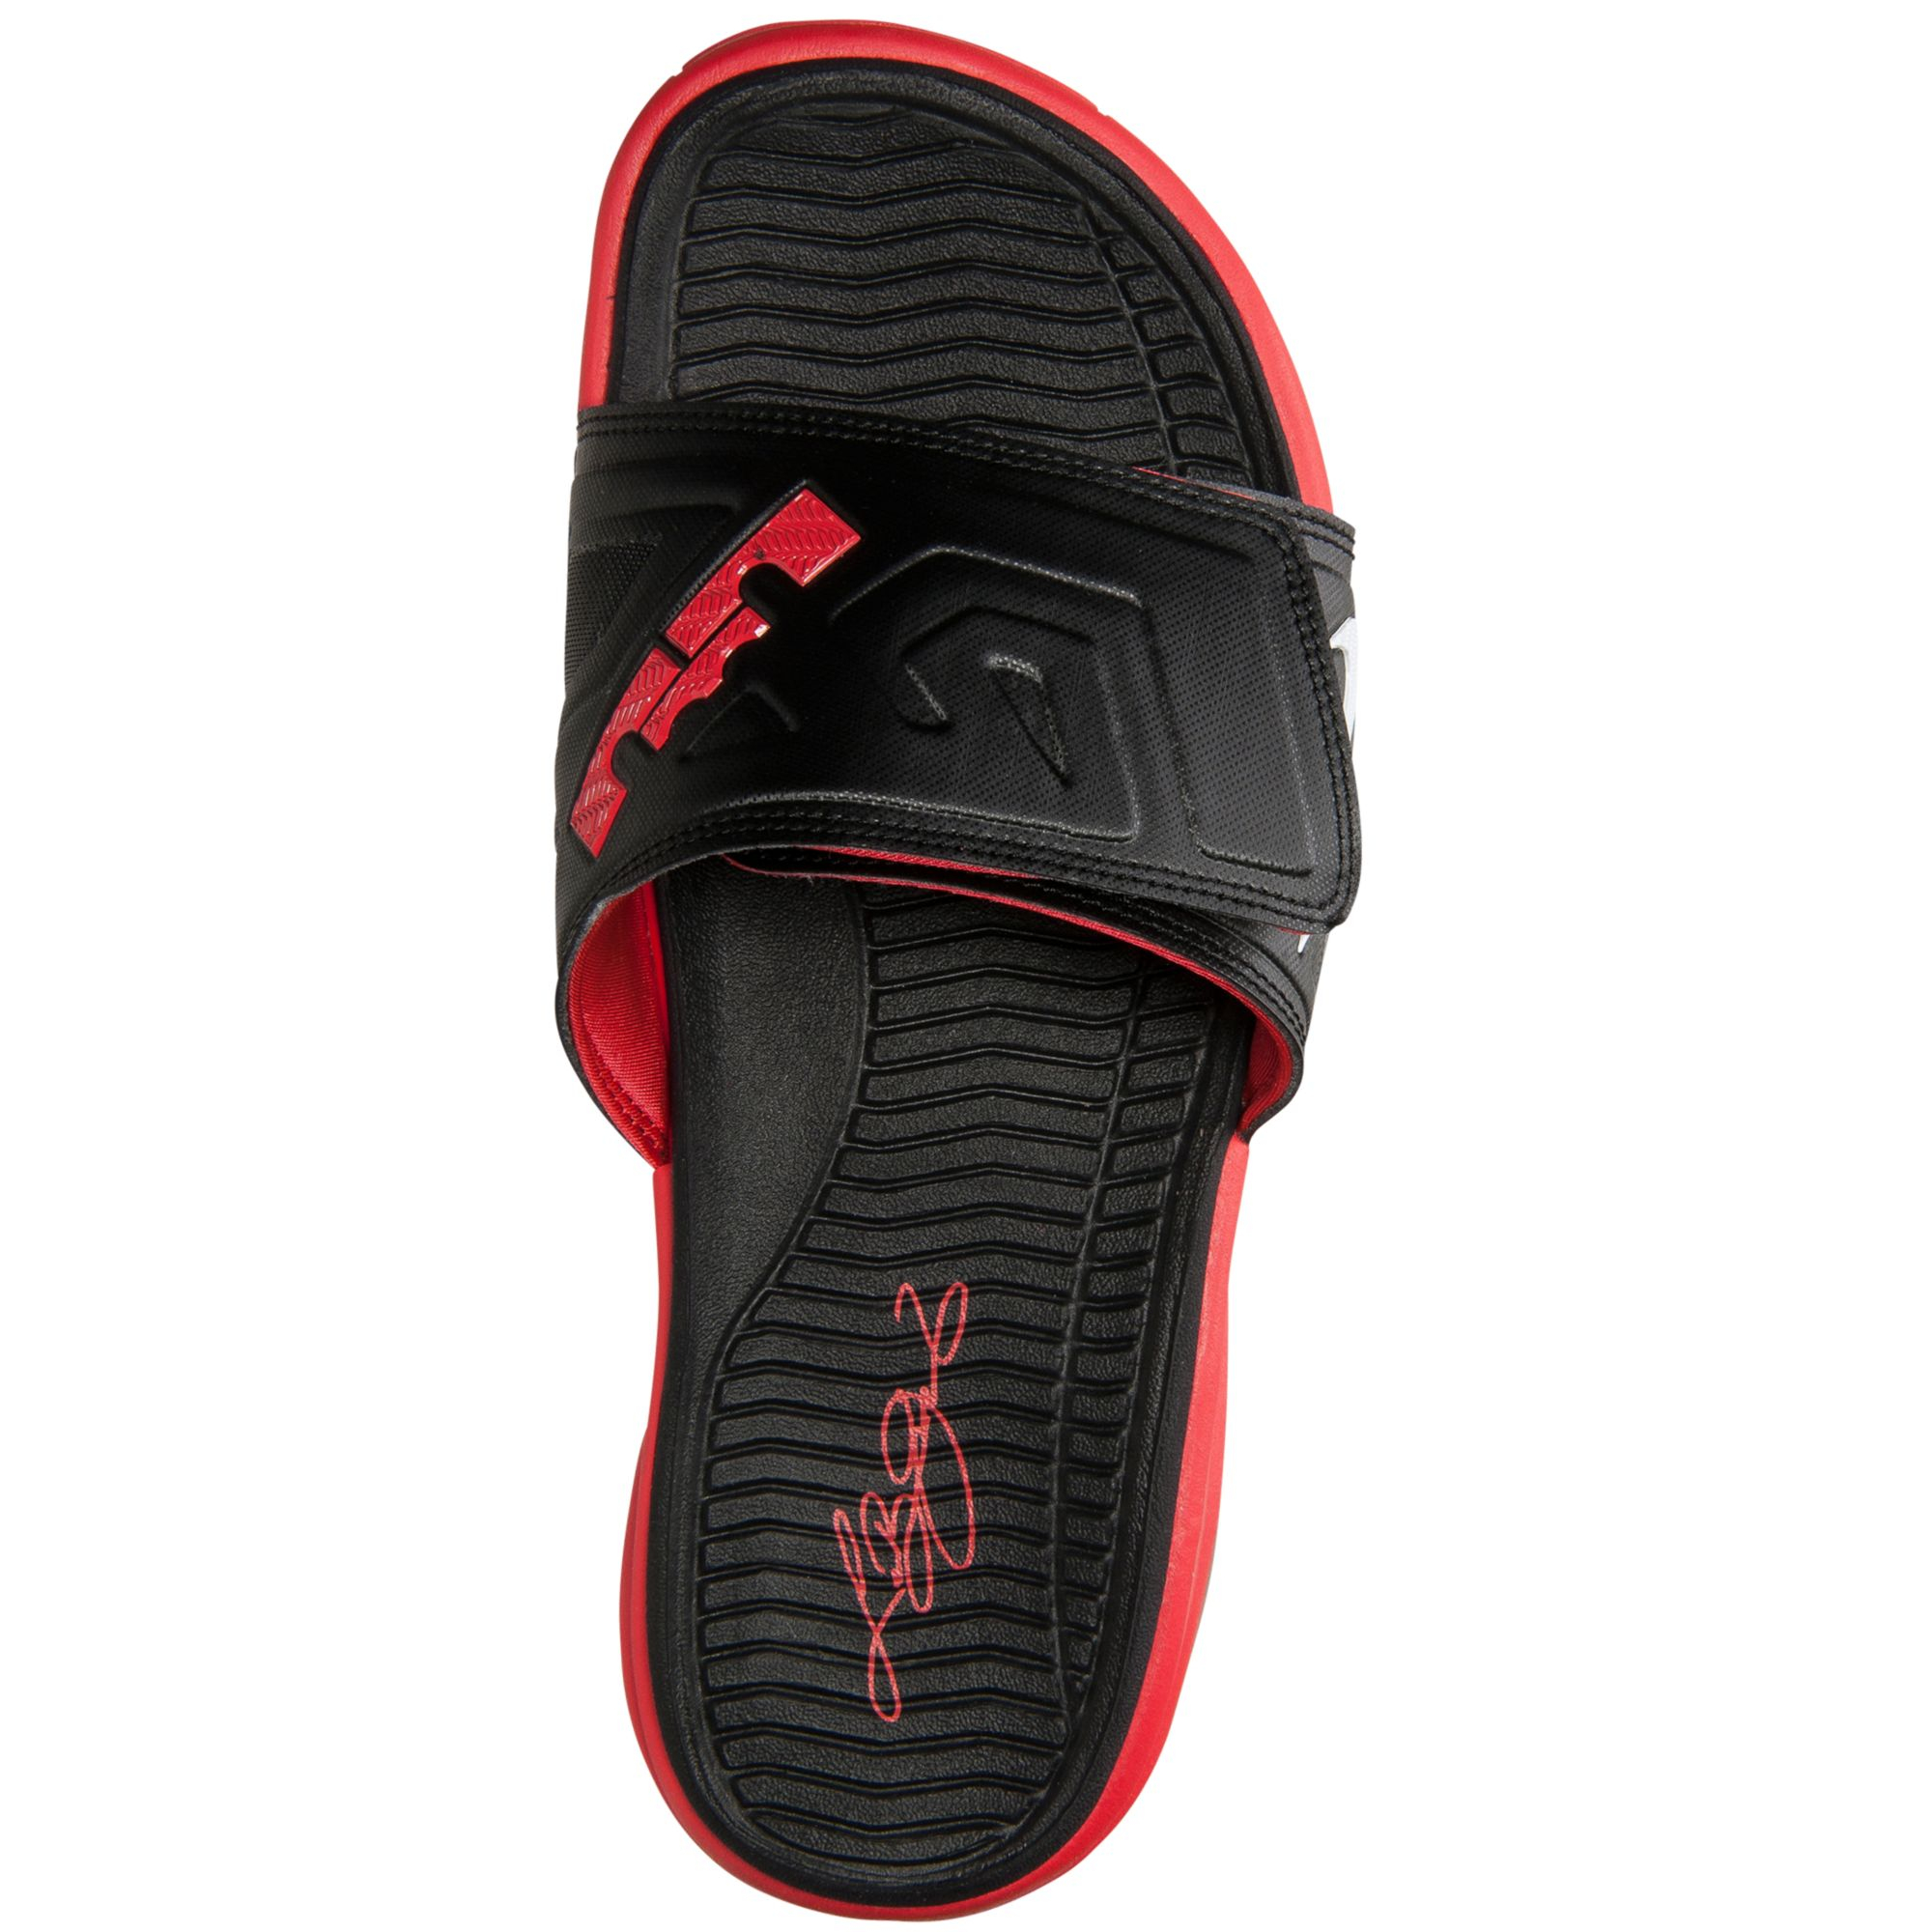 Lyst - Nike Mens Air Lebron 3 Elite Slide Sandals From Finish Line in ...